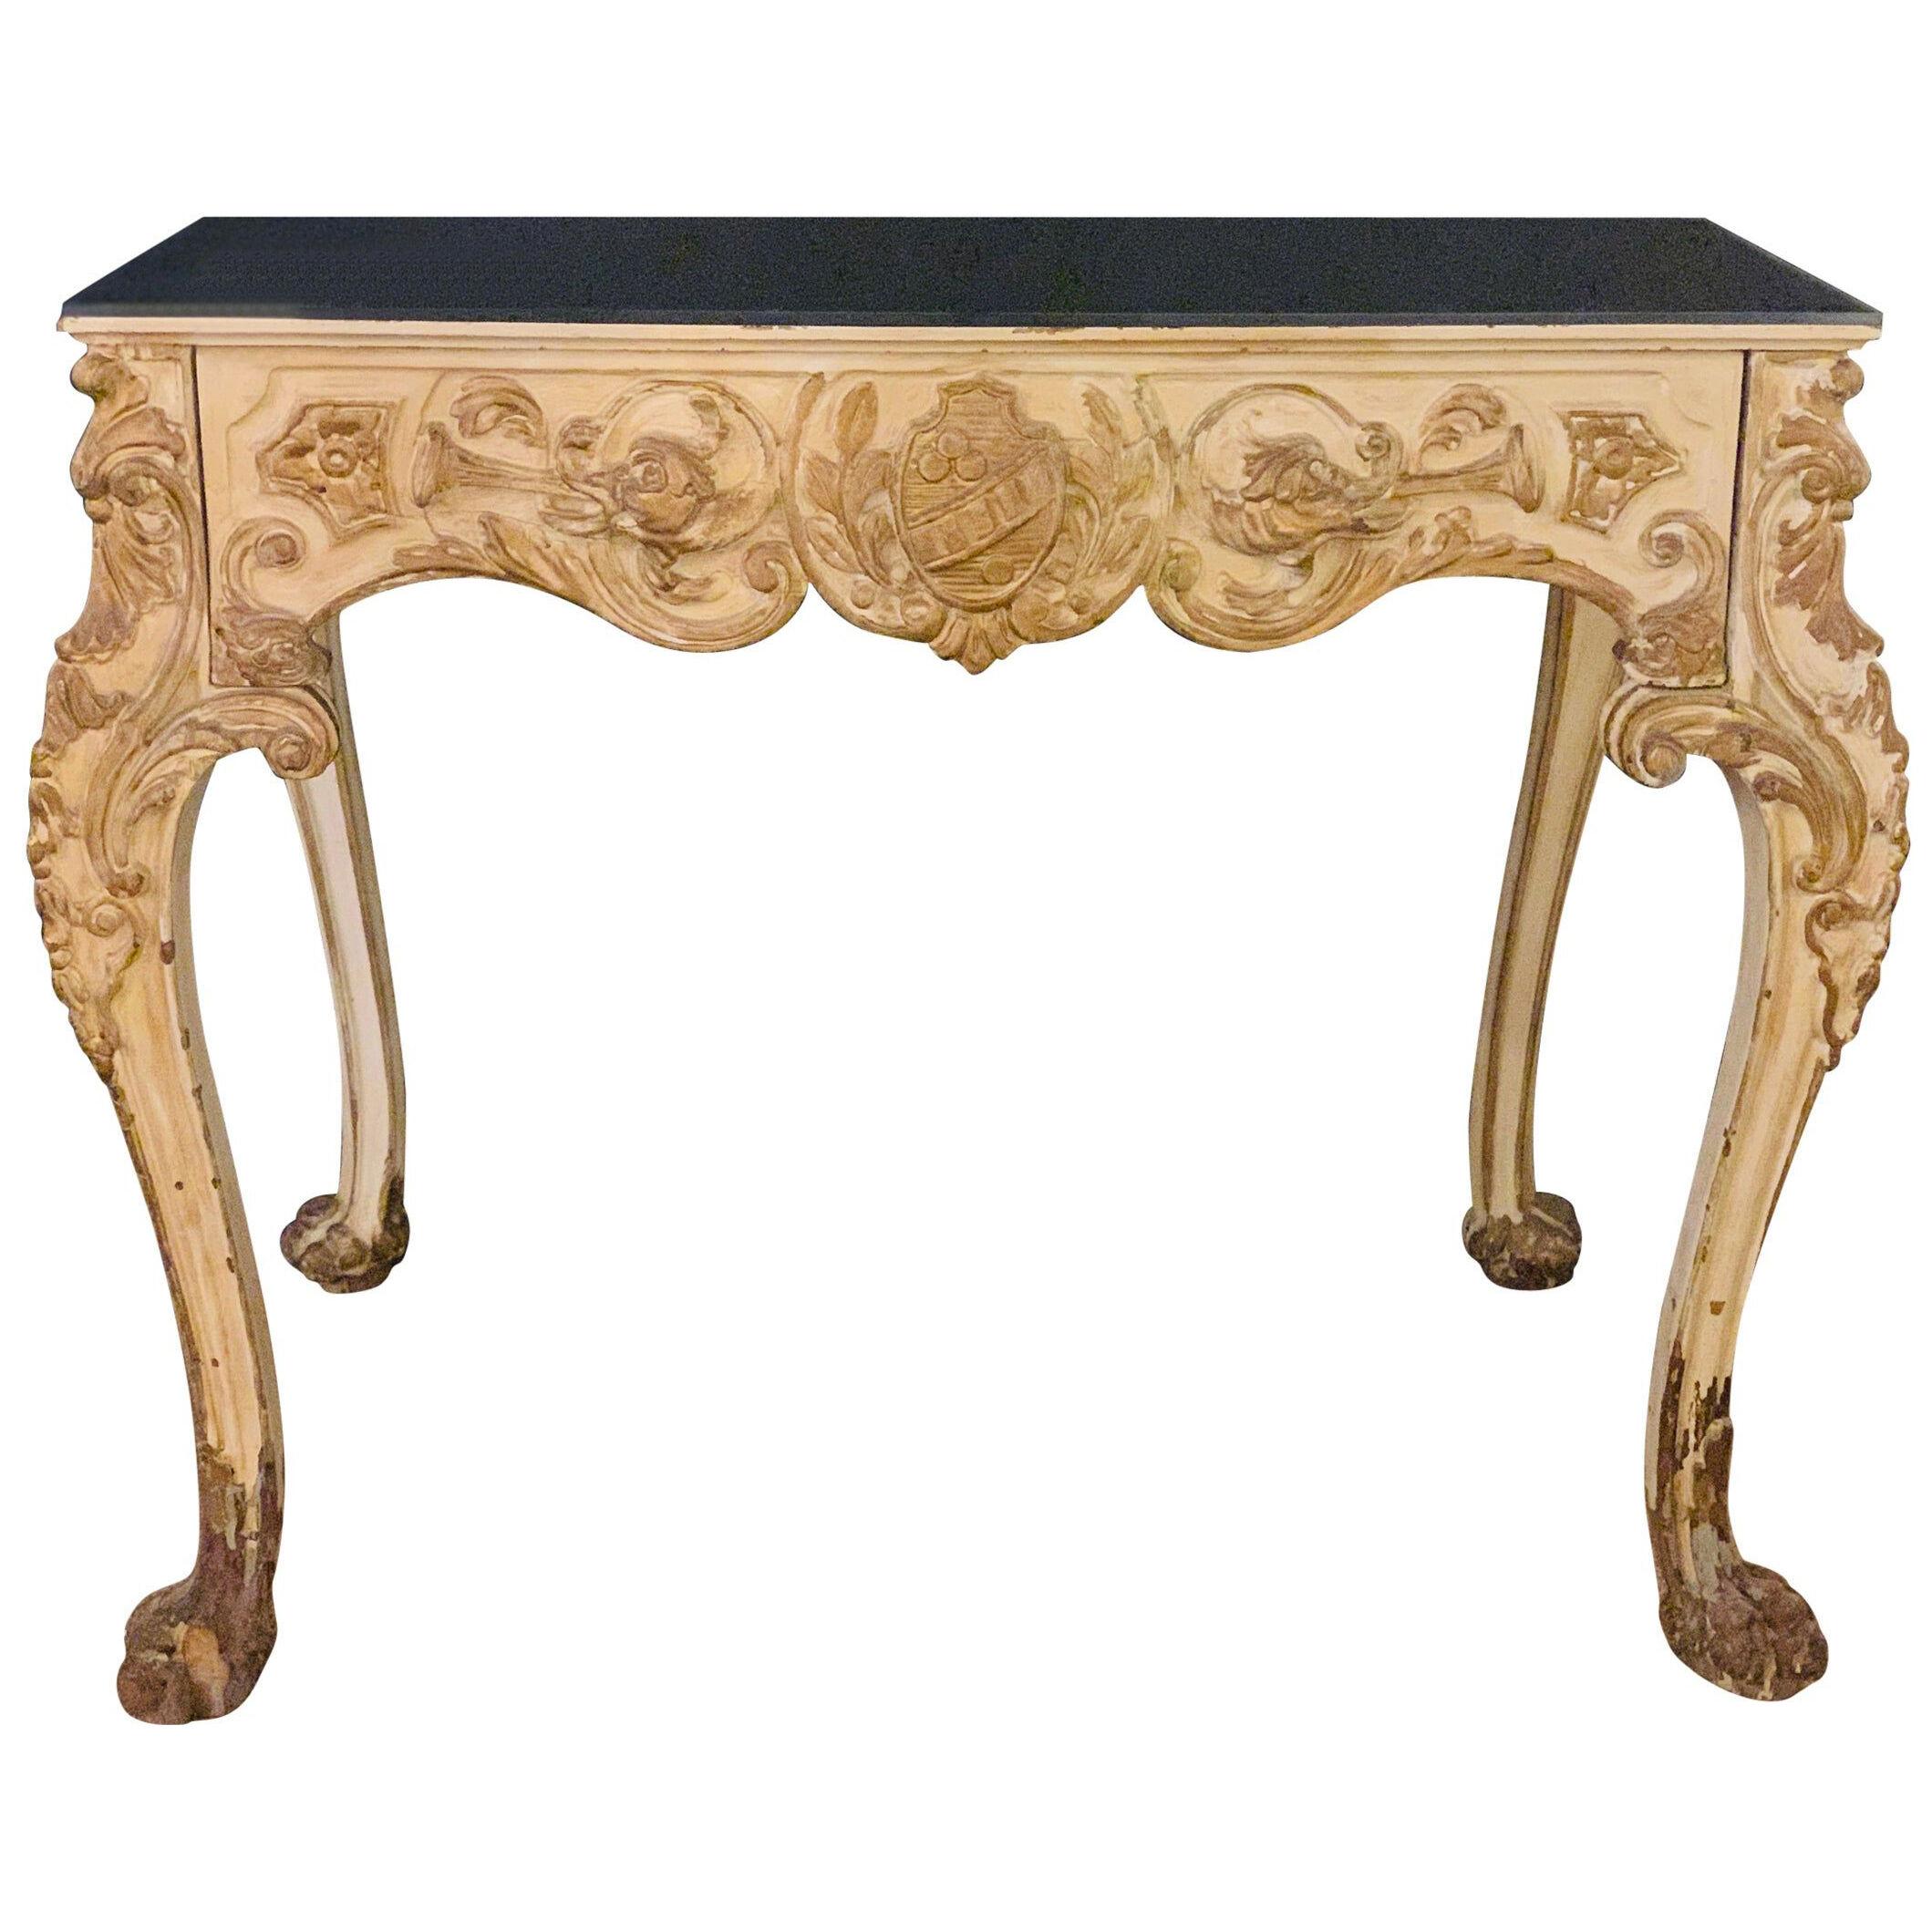 Finely Carved White and Parcel-Gilt Decorated Vanity / Desk by Jansen	